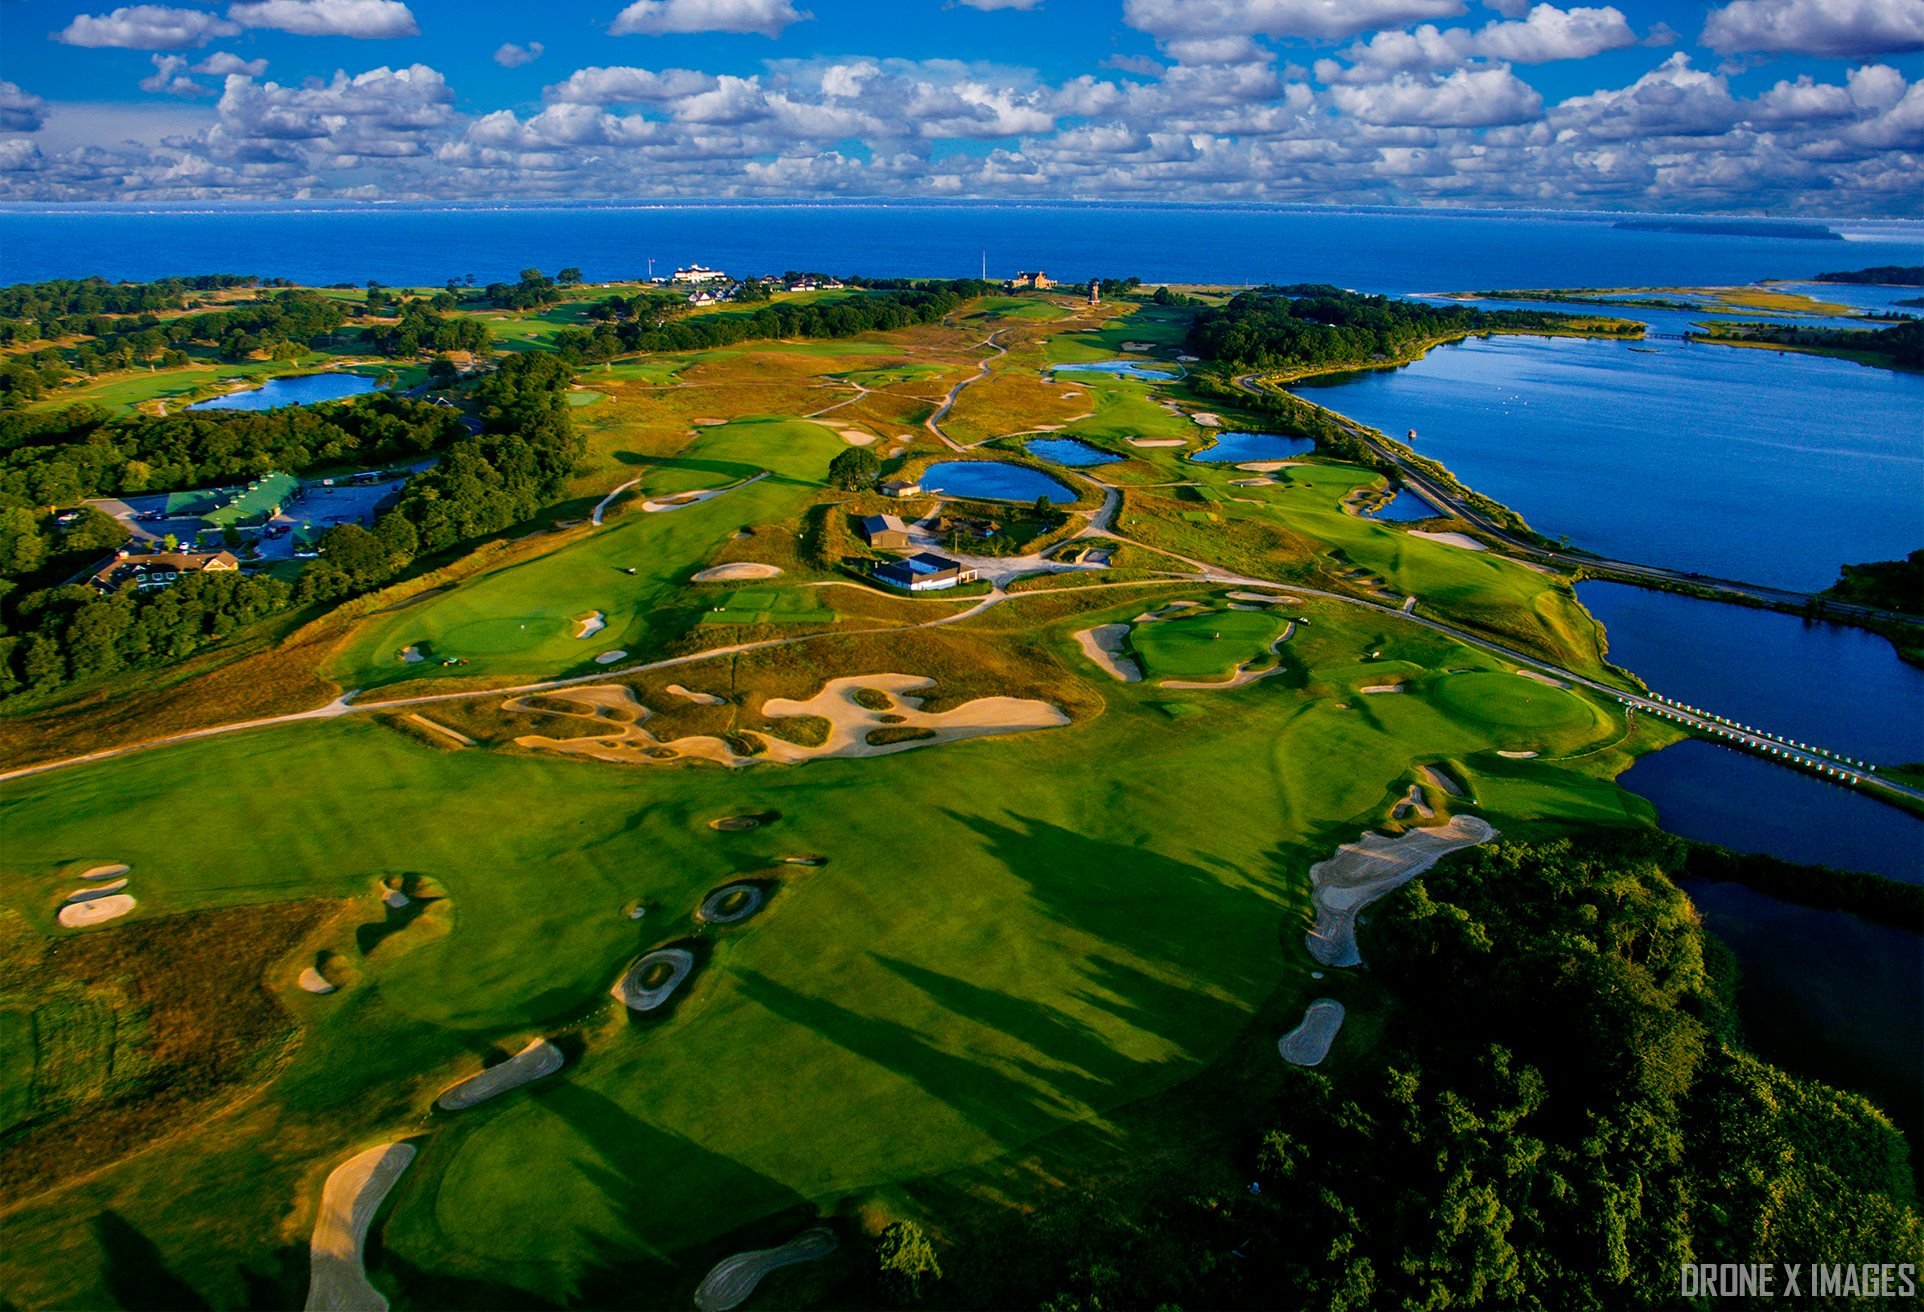 2nd Place National Golf Links of America, Southampton, NY by Spacecat @HamptonsDrone